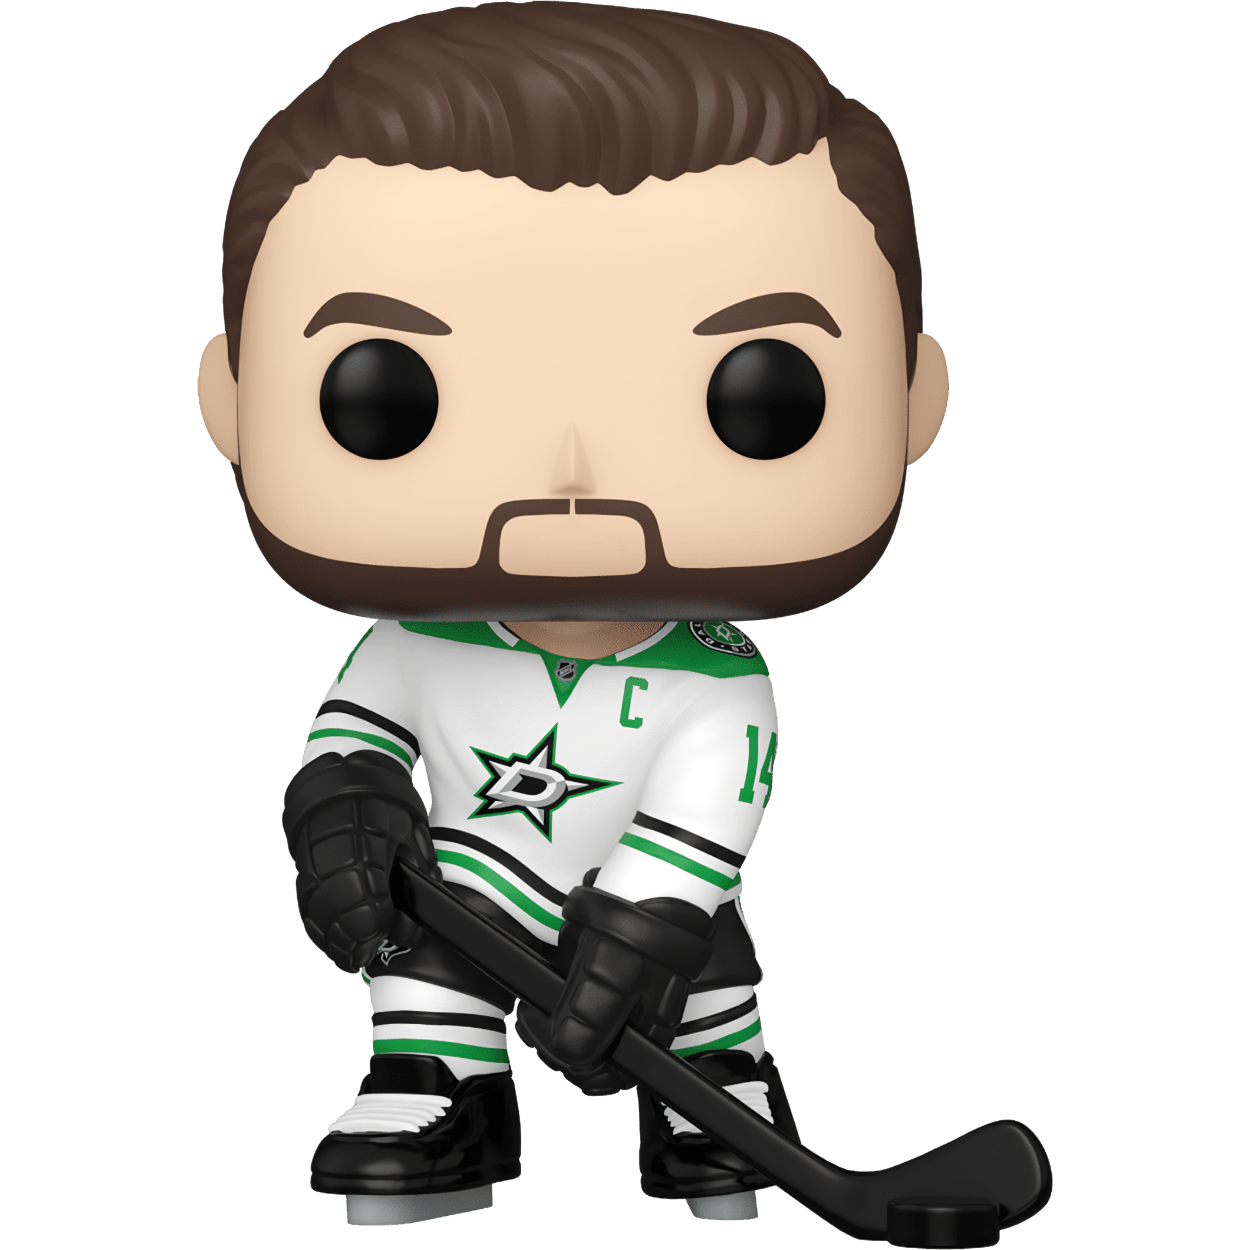 NHL mascots are the newest line of Funko POP! figurines